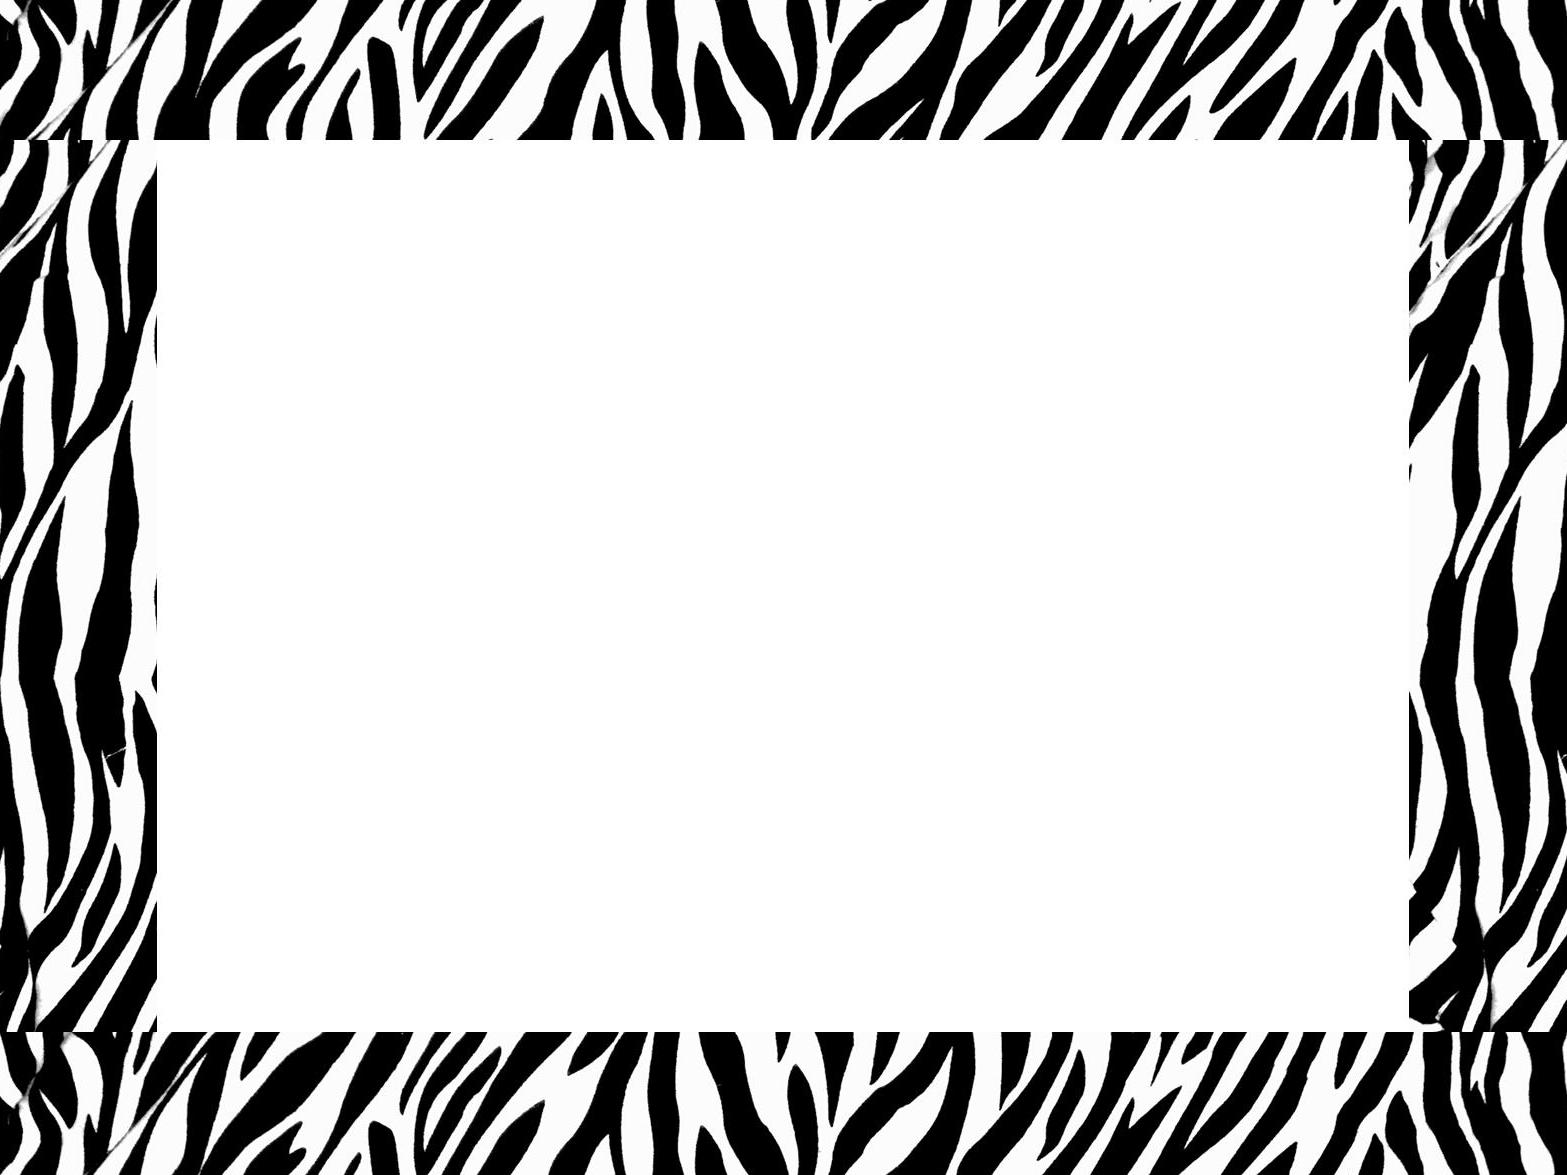 Zebra Label Template For Word printable label templates